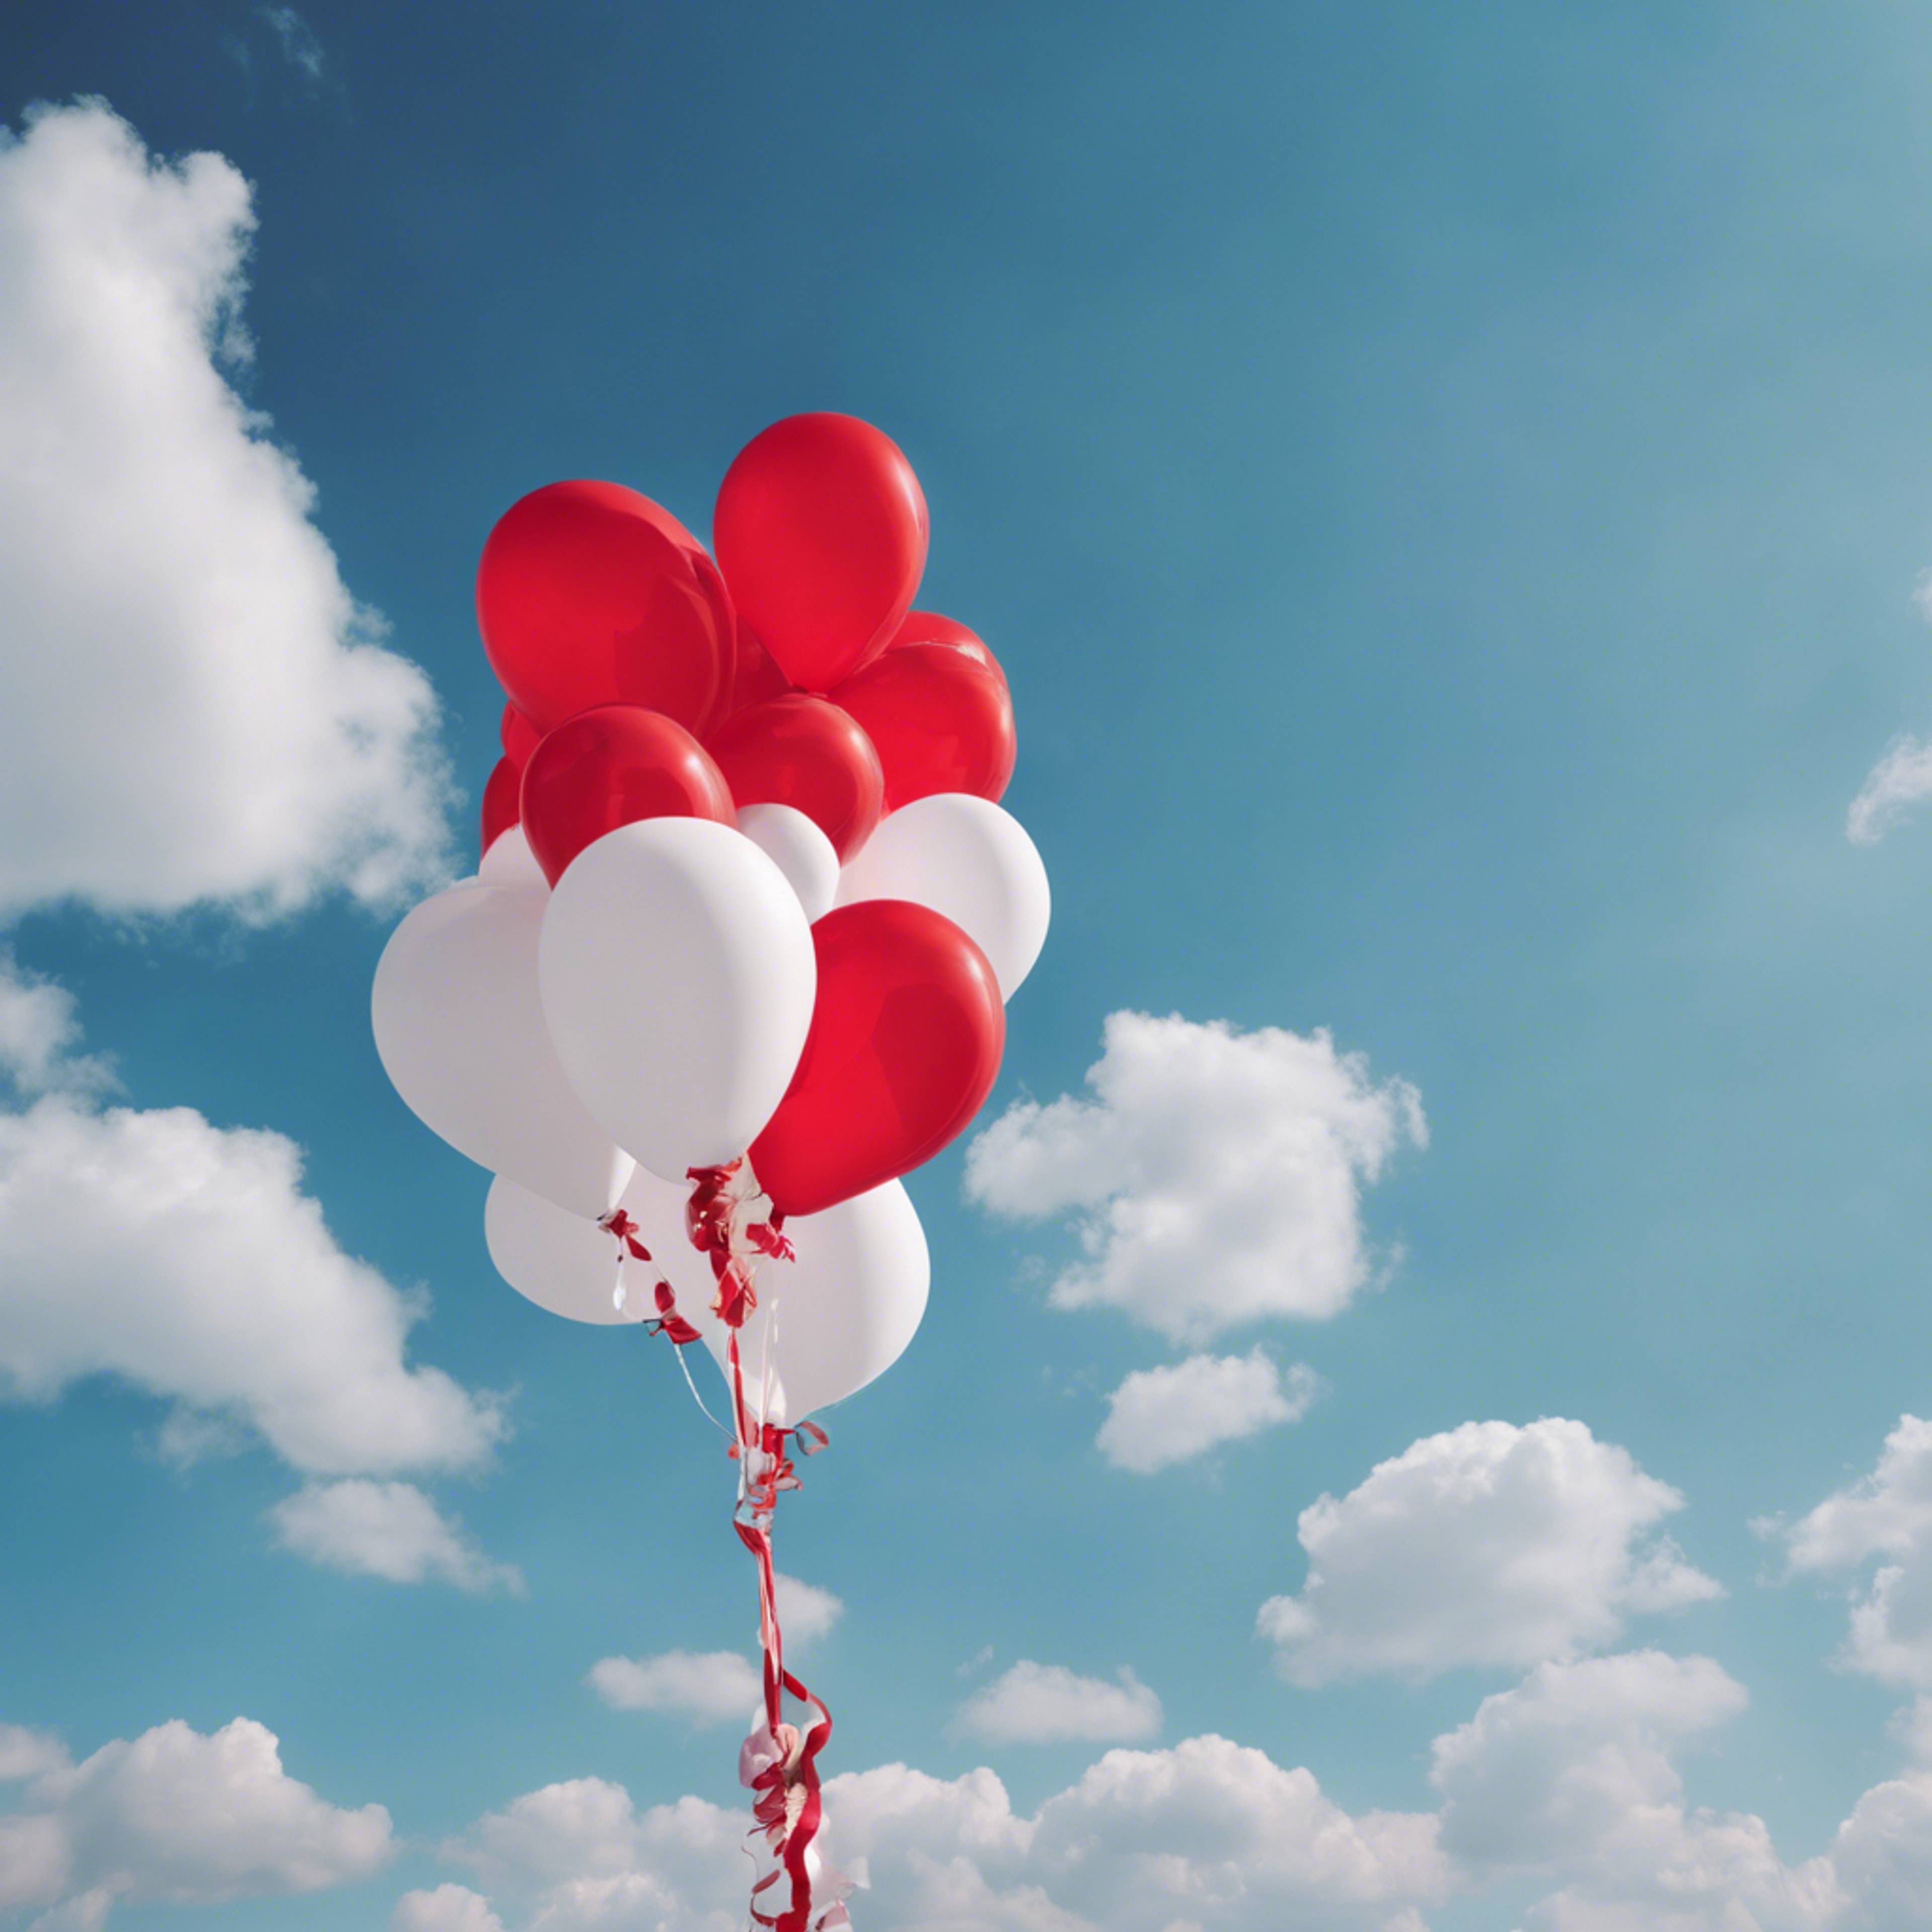 Festive red and white balloons strung together against the blue sky. Ταπετσαρία[5b7b2fc281444a4c8d70]